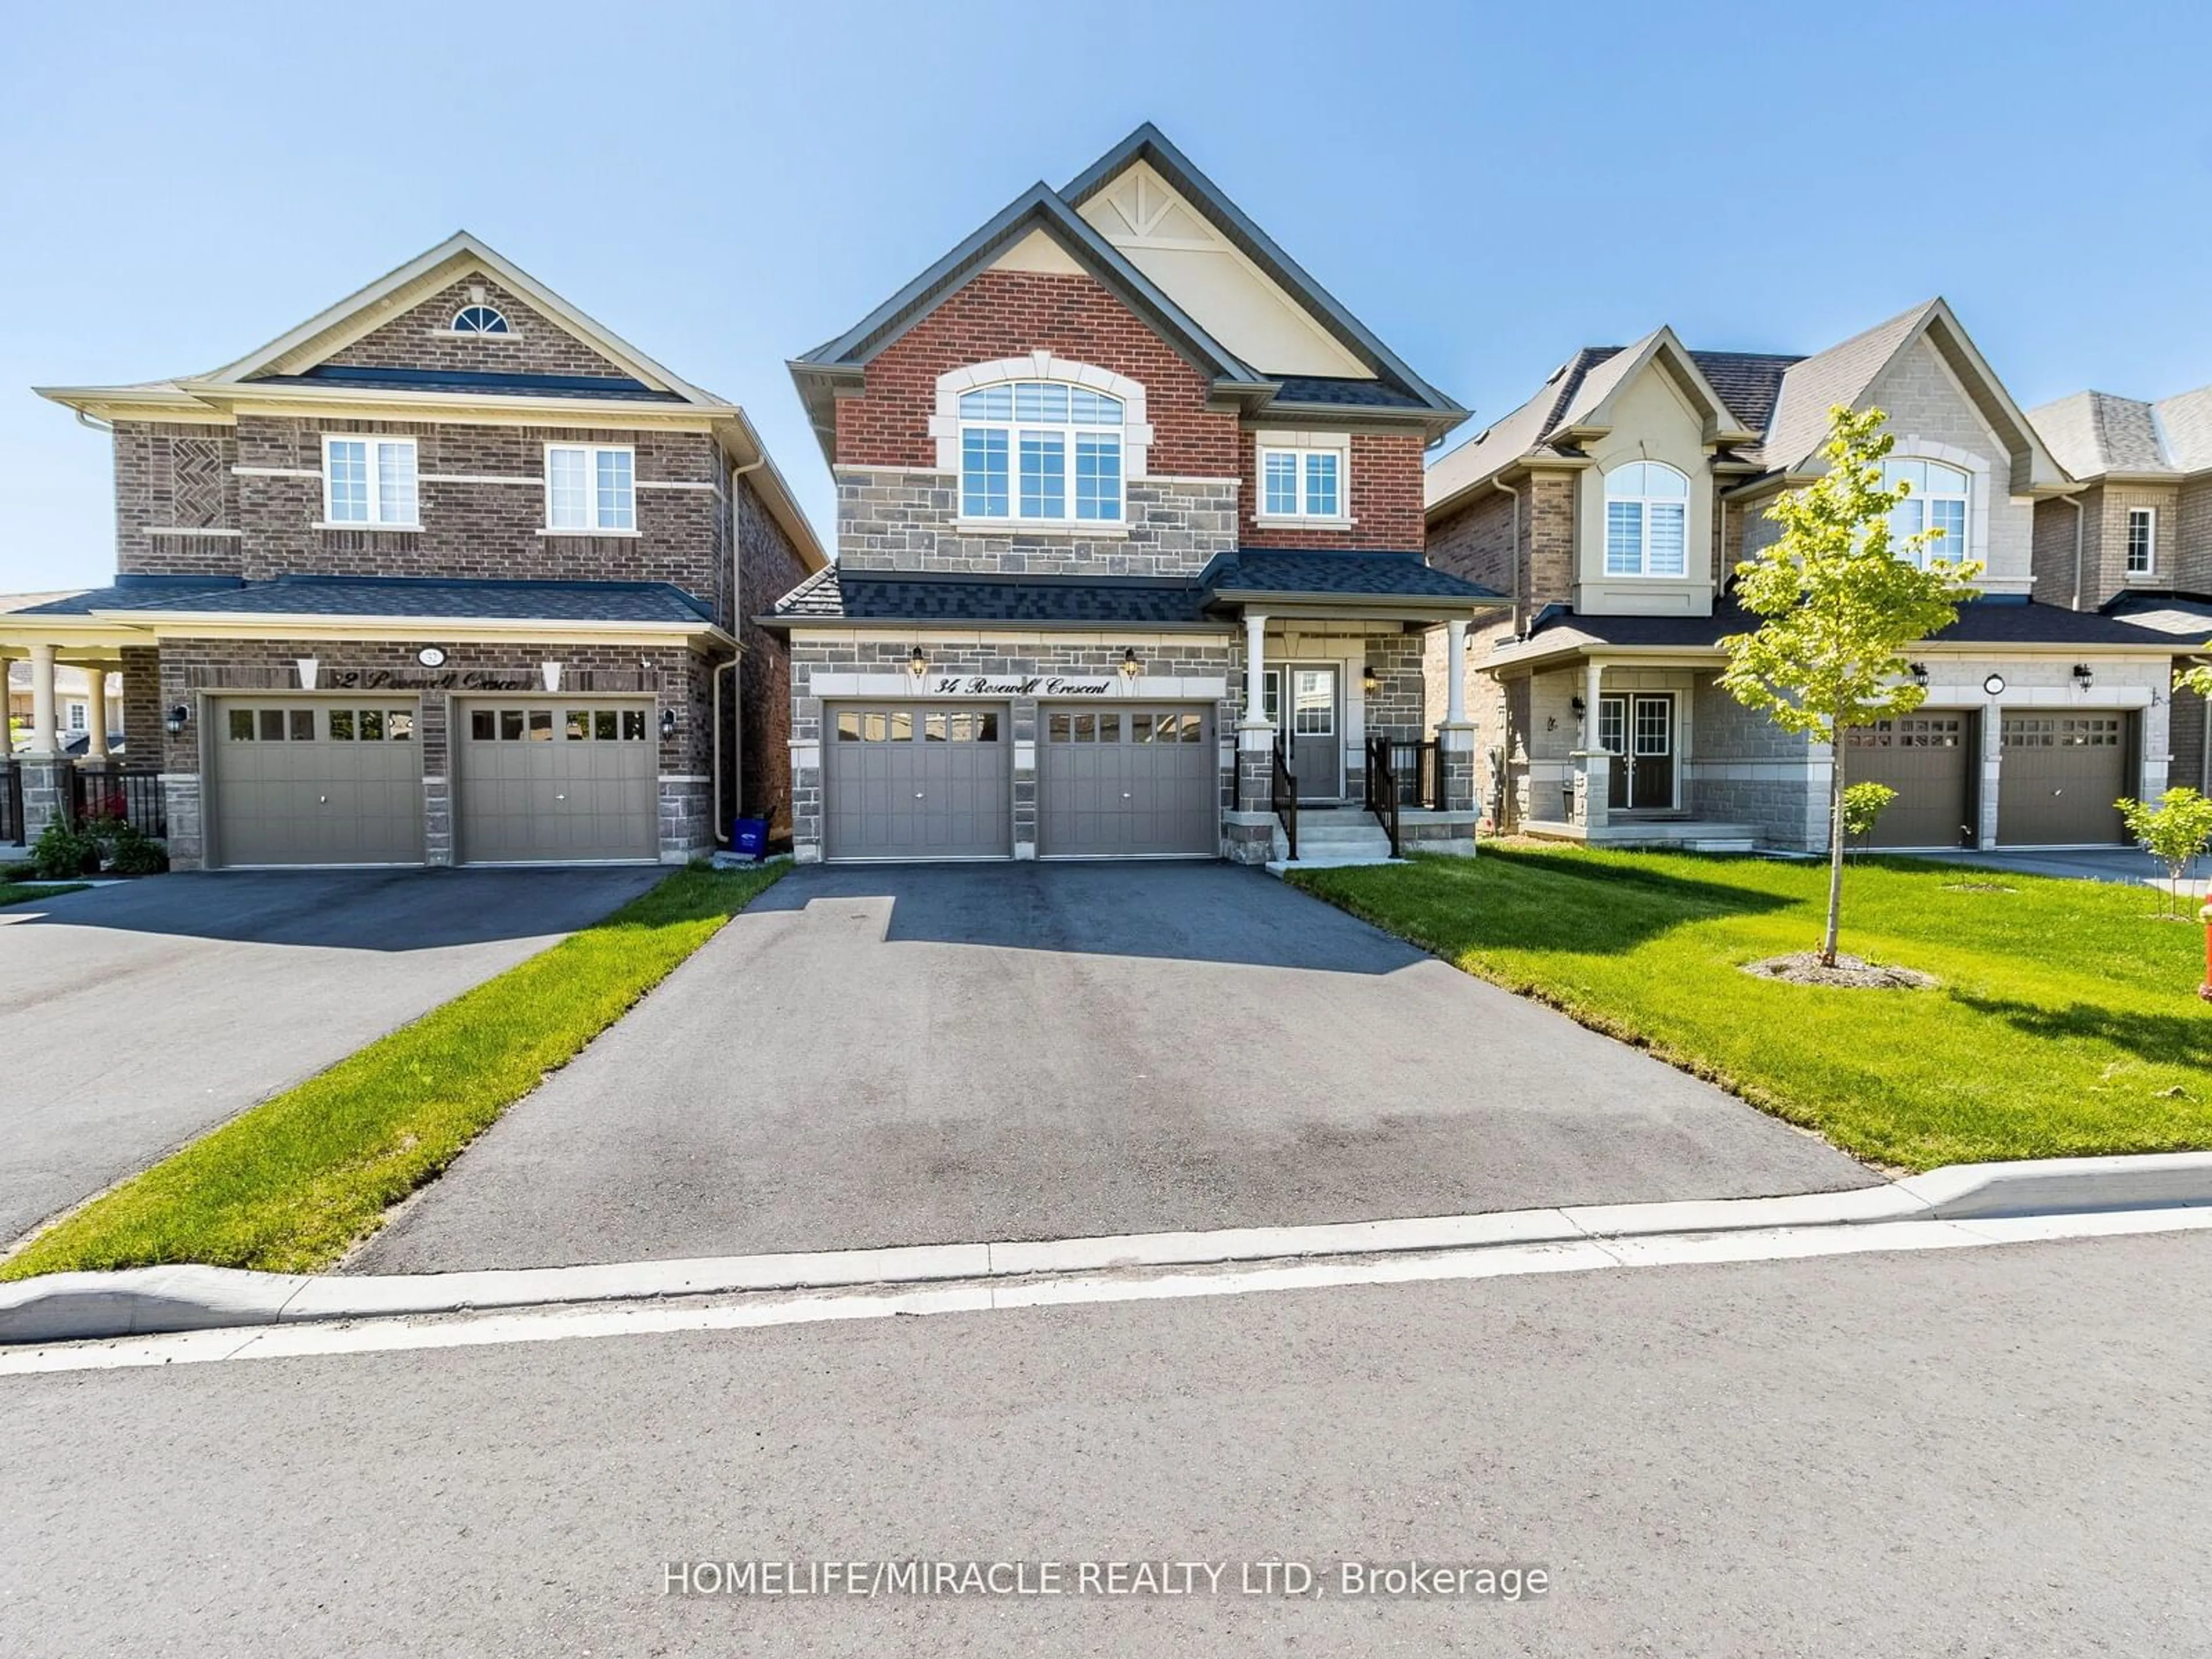 Frontside or backside of a home for 34 Rosewell Cres, Halton Hills Ontario L7G 0N4